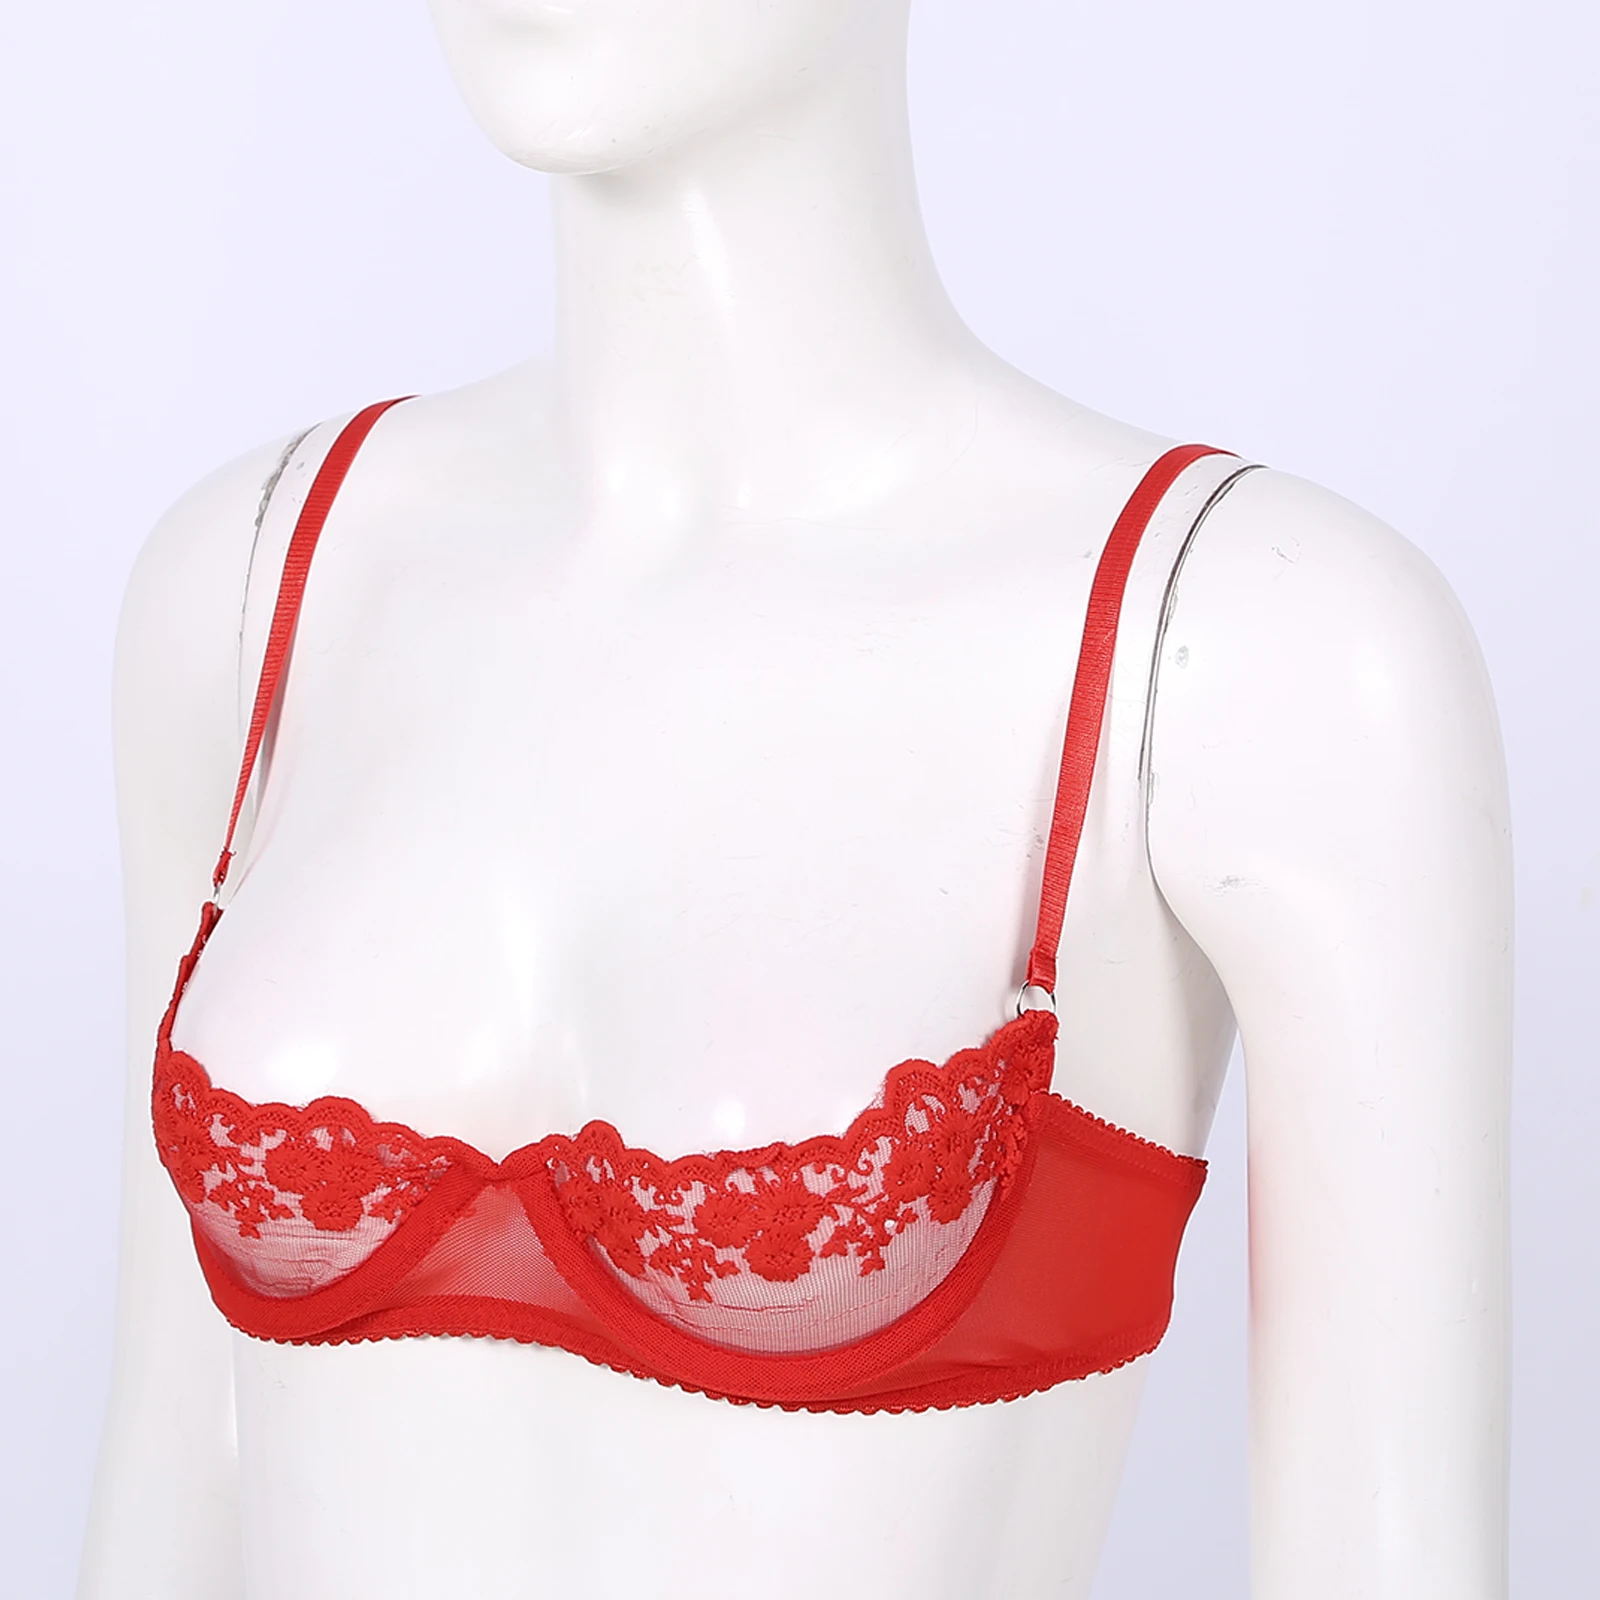 Women's Sheer Lace Bra Spaghetti Straps 1/4 Cup Push Up Lingerie